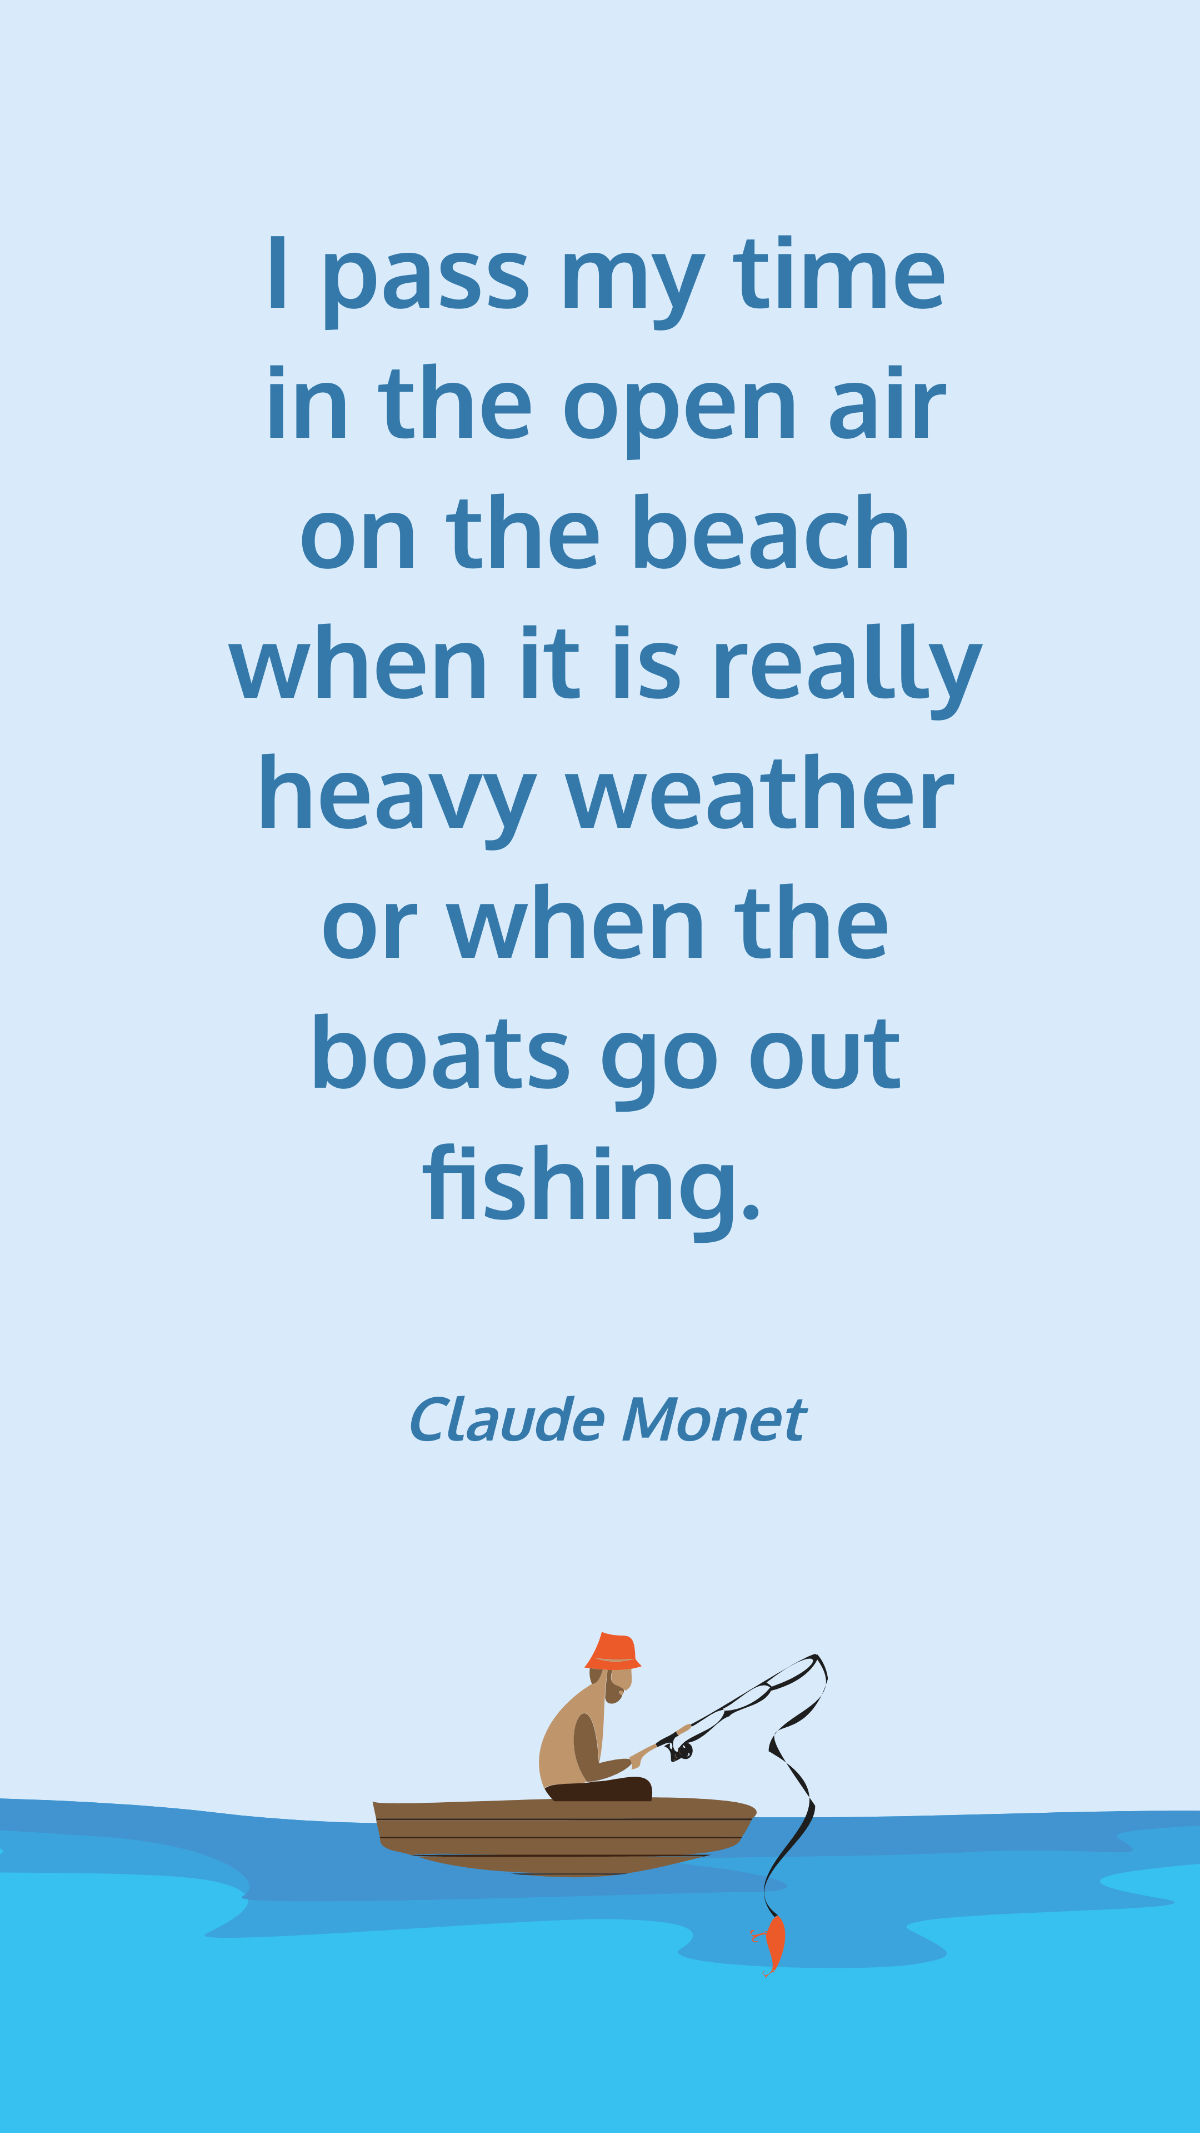 Claude Monet - I pass my time in the open air on the beach when it is really heavy weather or when the boats go out fishing. Template